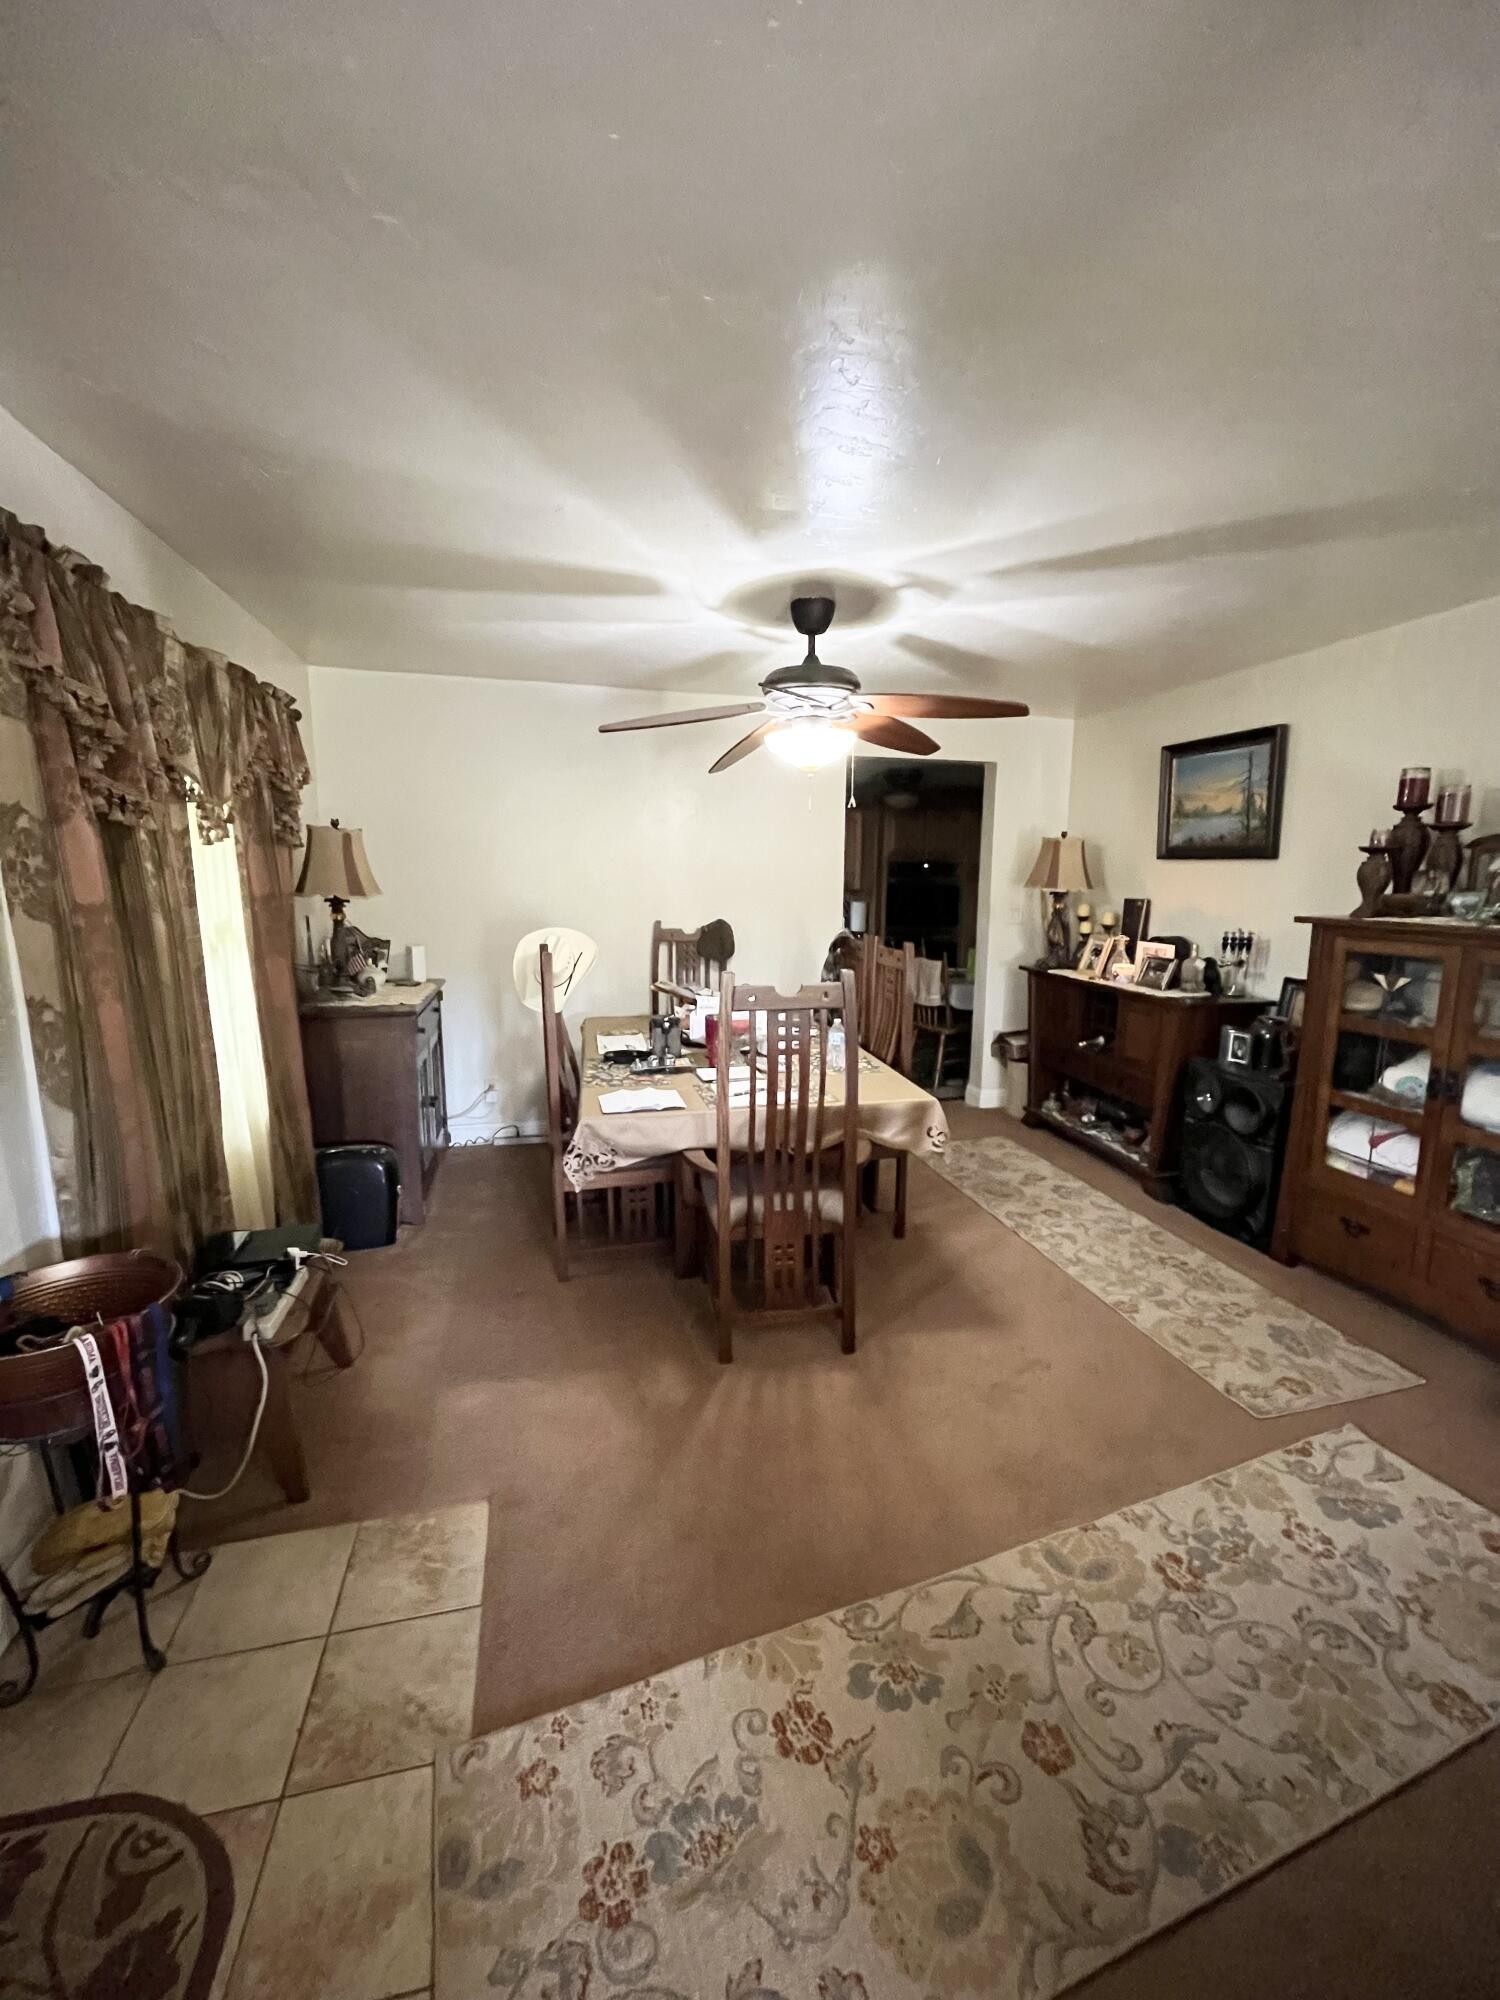 Colcord, Oklahoma, 74338, United States, 3 Bedrooms Bedrooms, ,2 BathroomsBathrooms,Residential,For Sale,1412525